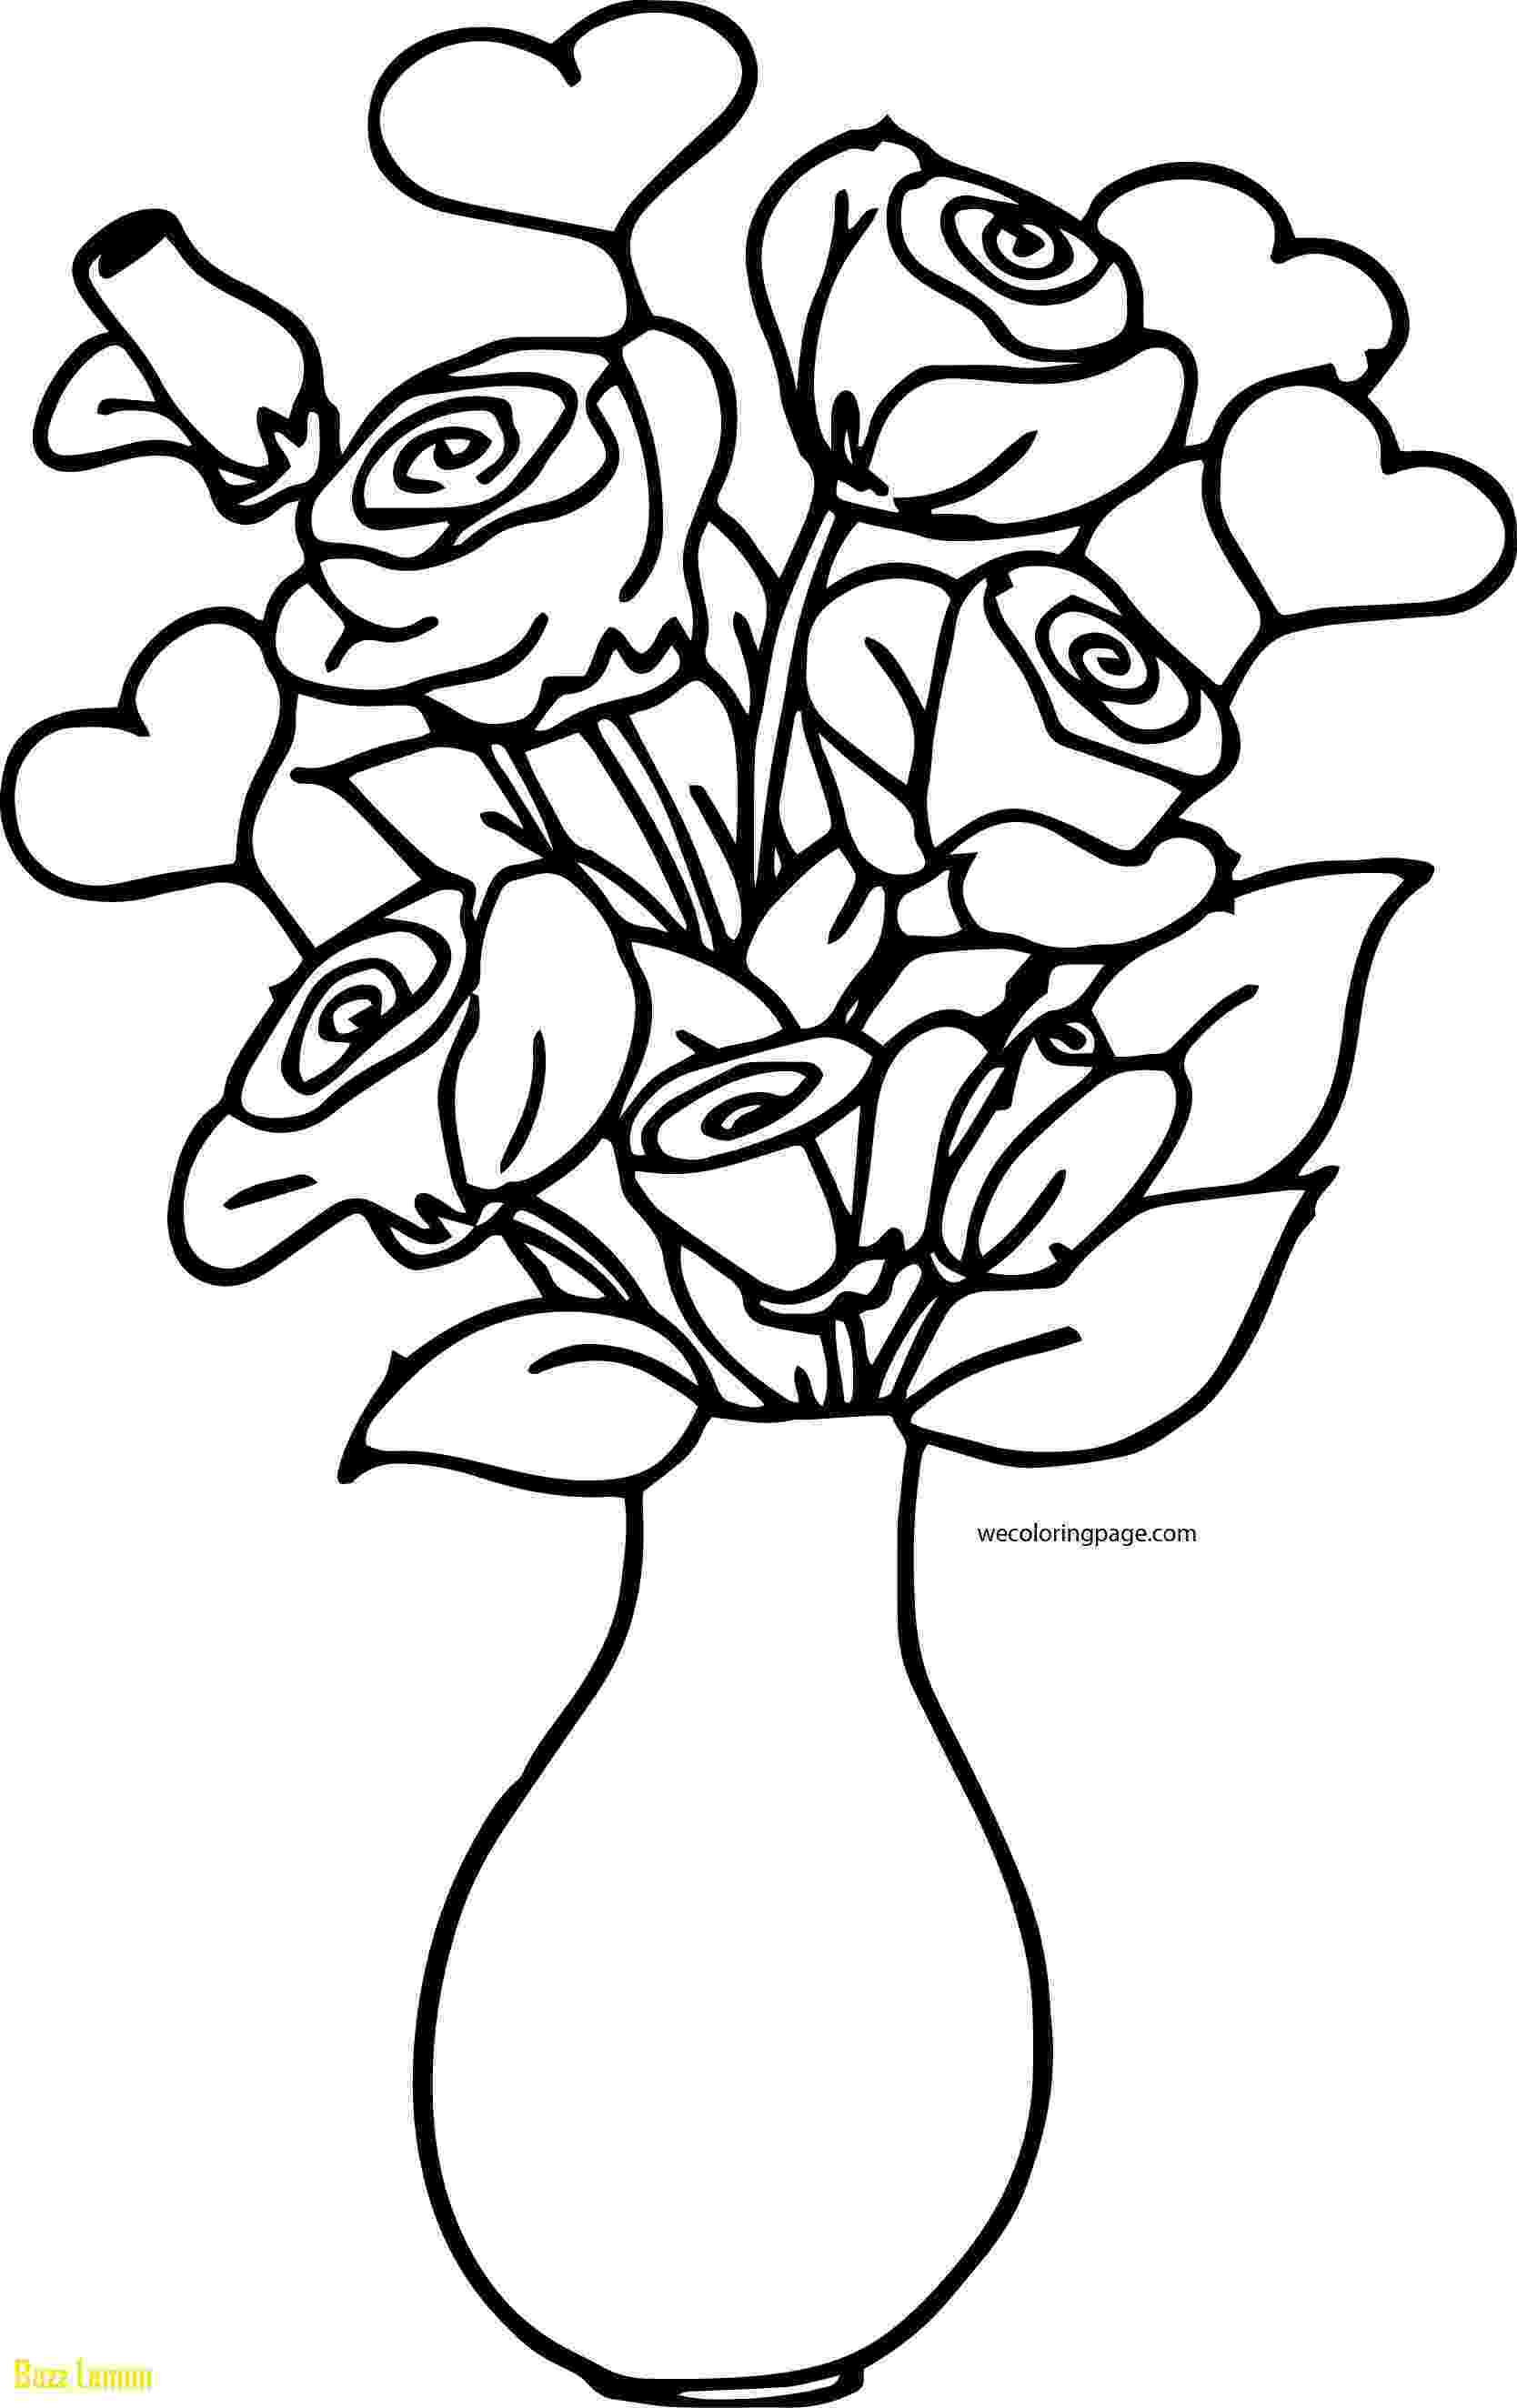 coloring pages flowers in vase long orchid flower vase coloring page download free long in coloring flowers pages vase 